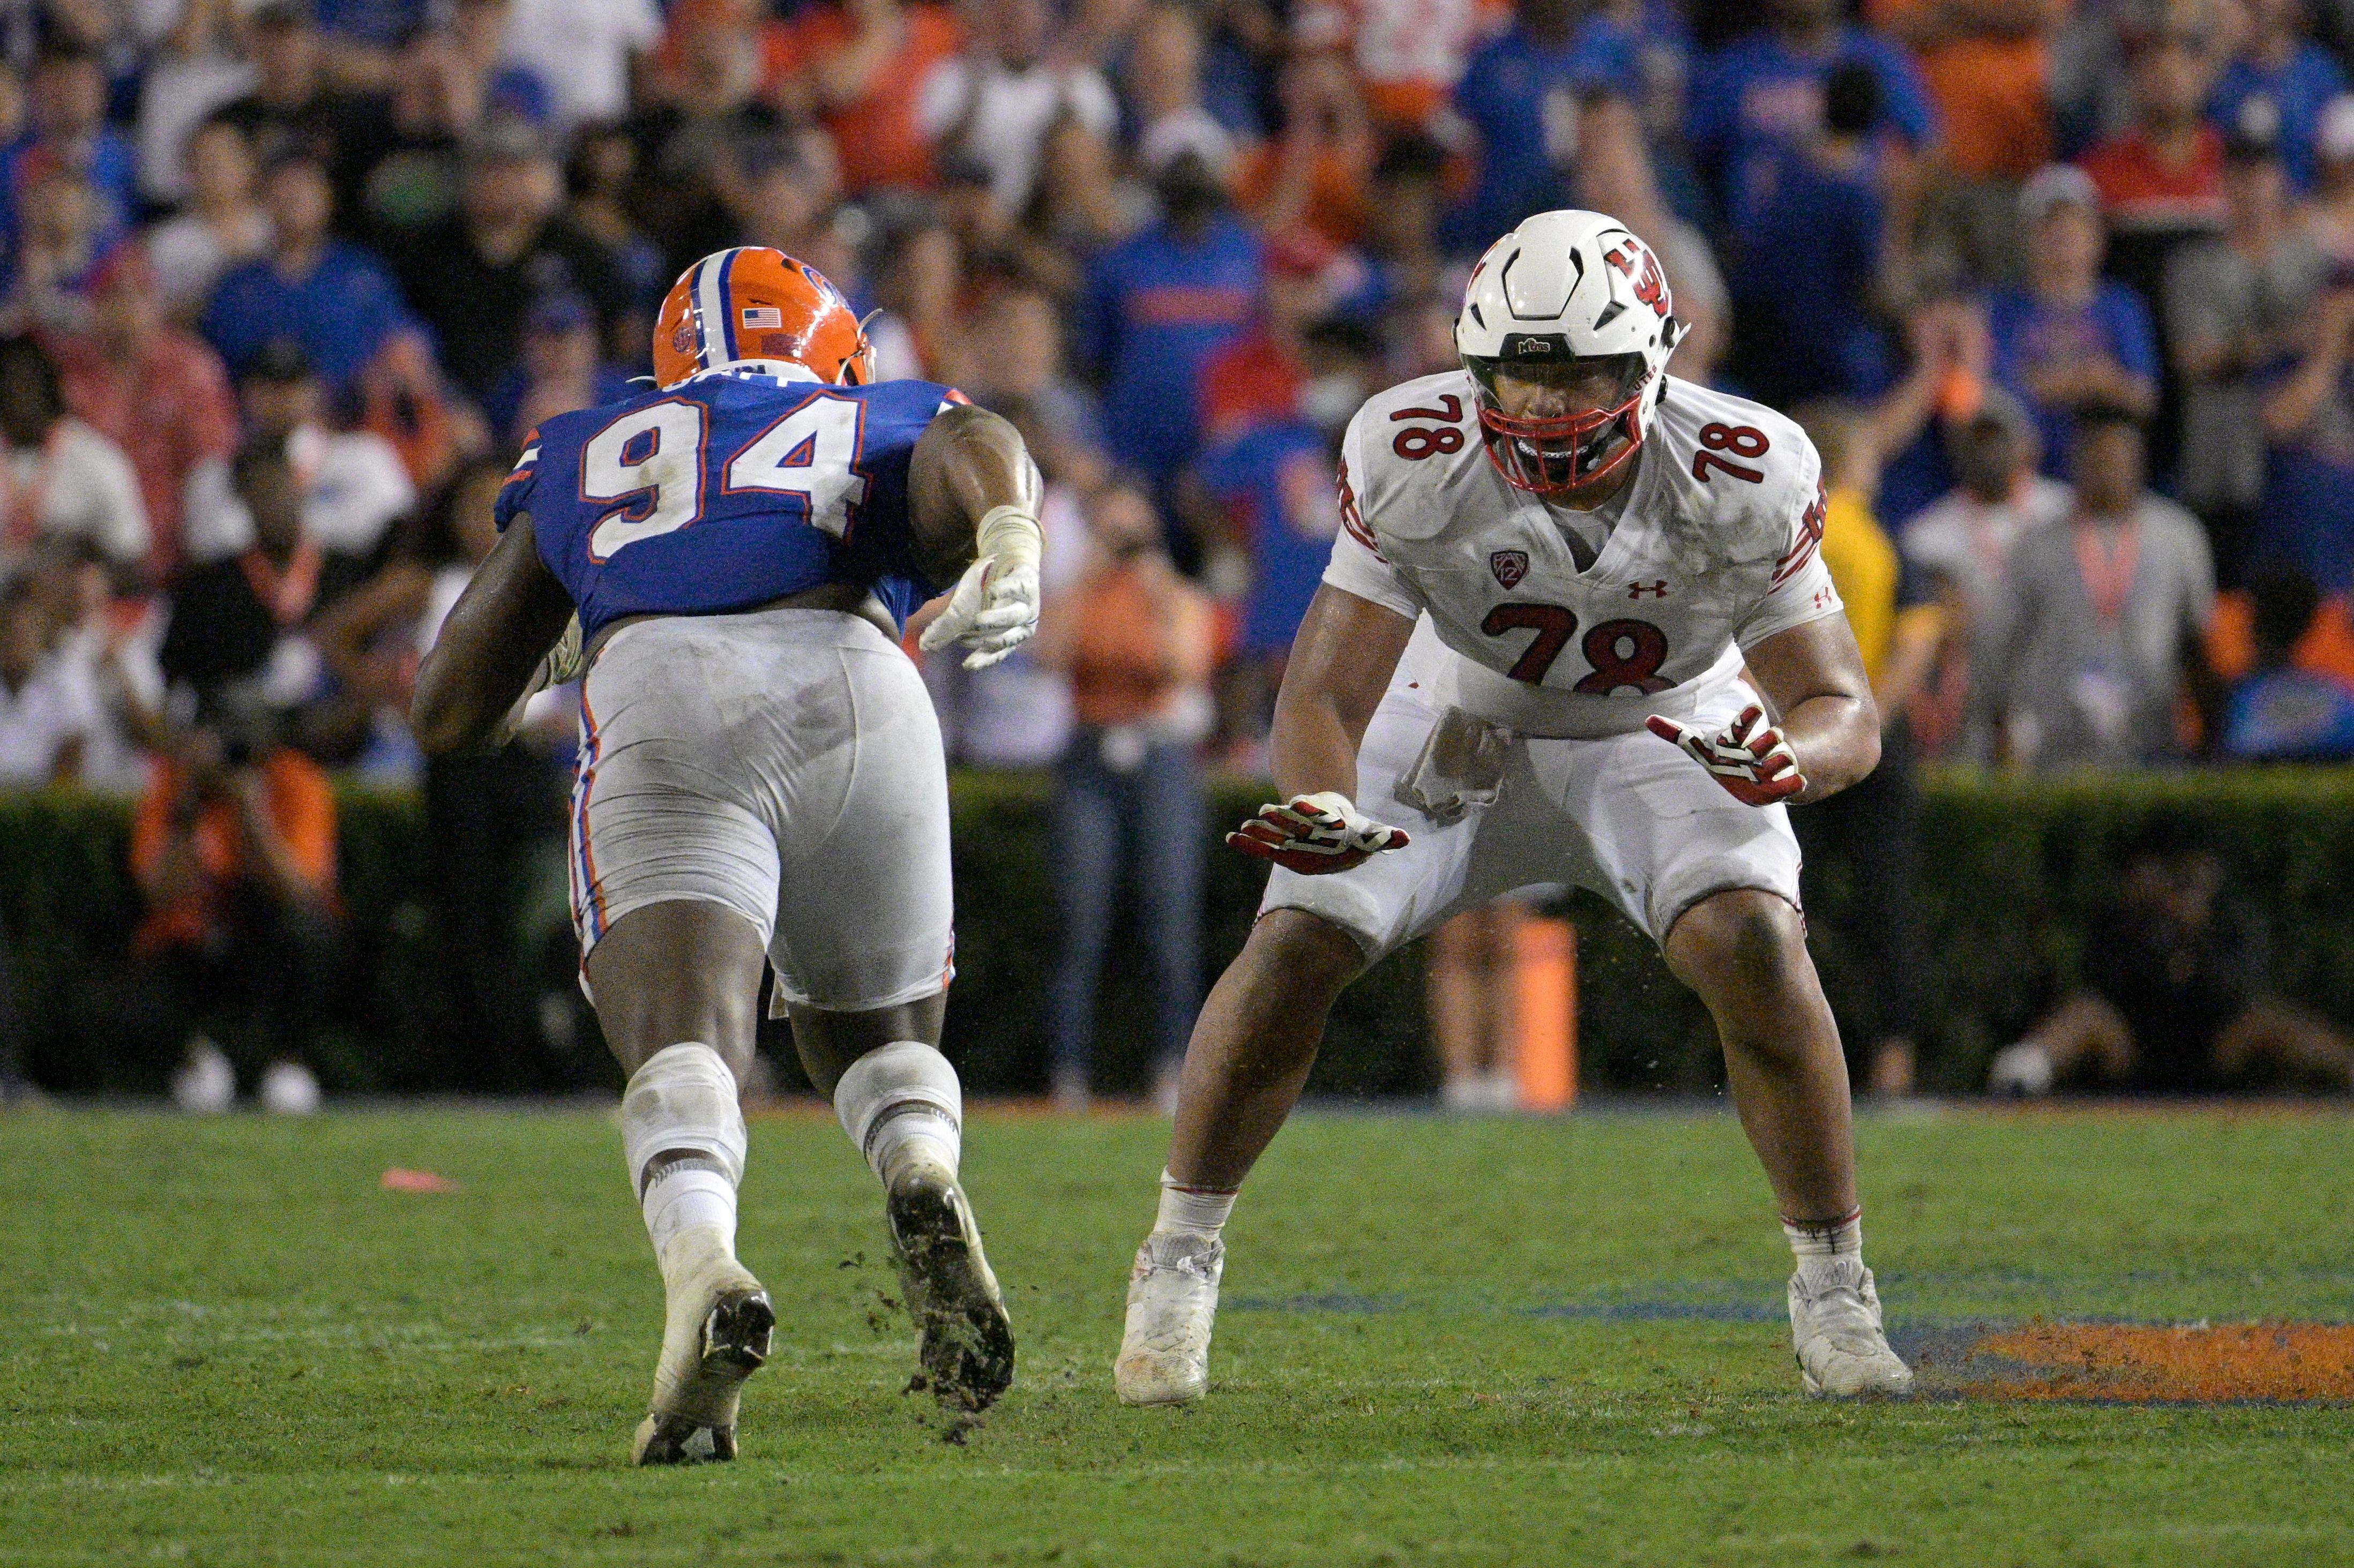 (Phelan M. Ebenhack | AP) Utah offensive lineman Sataoa Laumea (78) sets up to block in front of Florida defensive lineman Tyreak Sapp (94) during the second half of an NCAA college football game, Saturday, Sept. 3, 2022, in Gainesville, Fla.